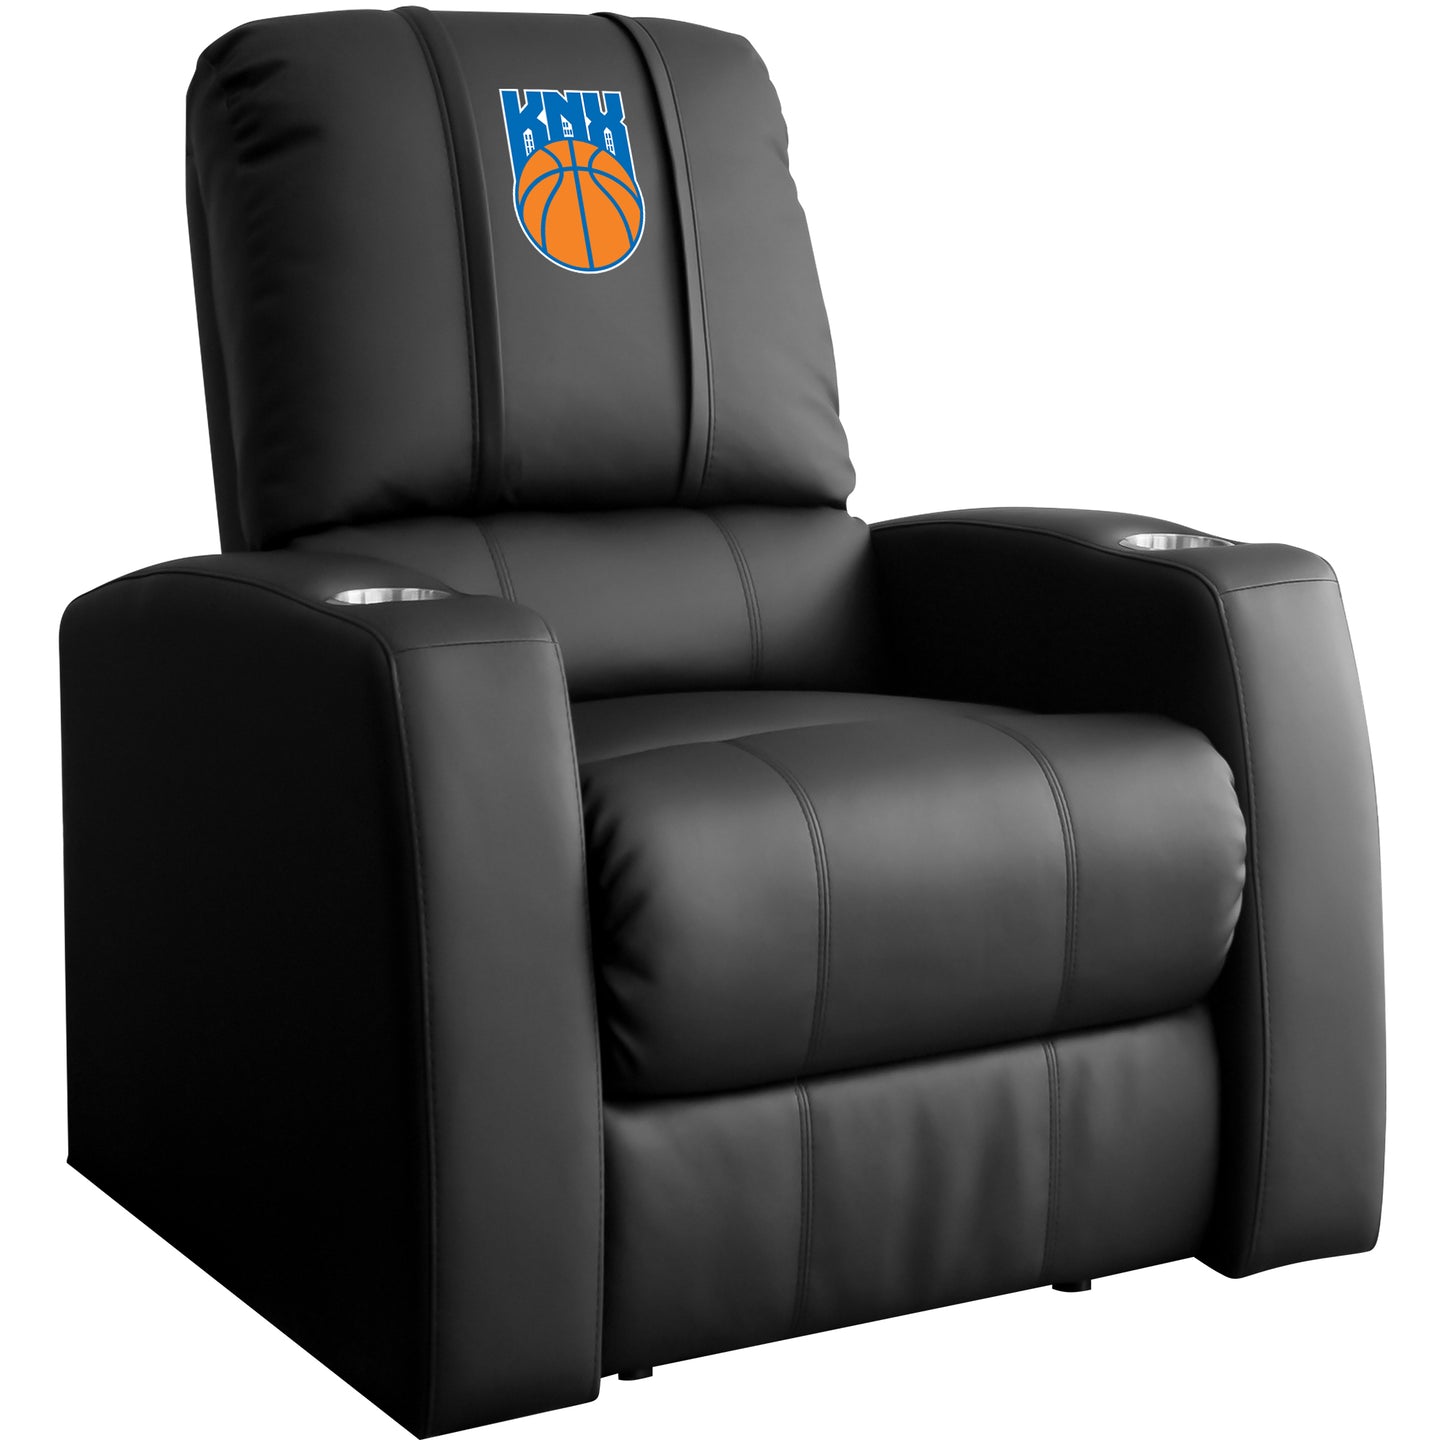 Relax Home Theater Recliner with Knicks Gaming Secondary Logo